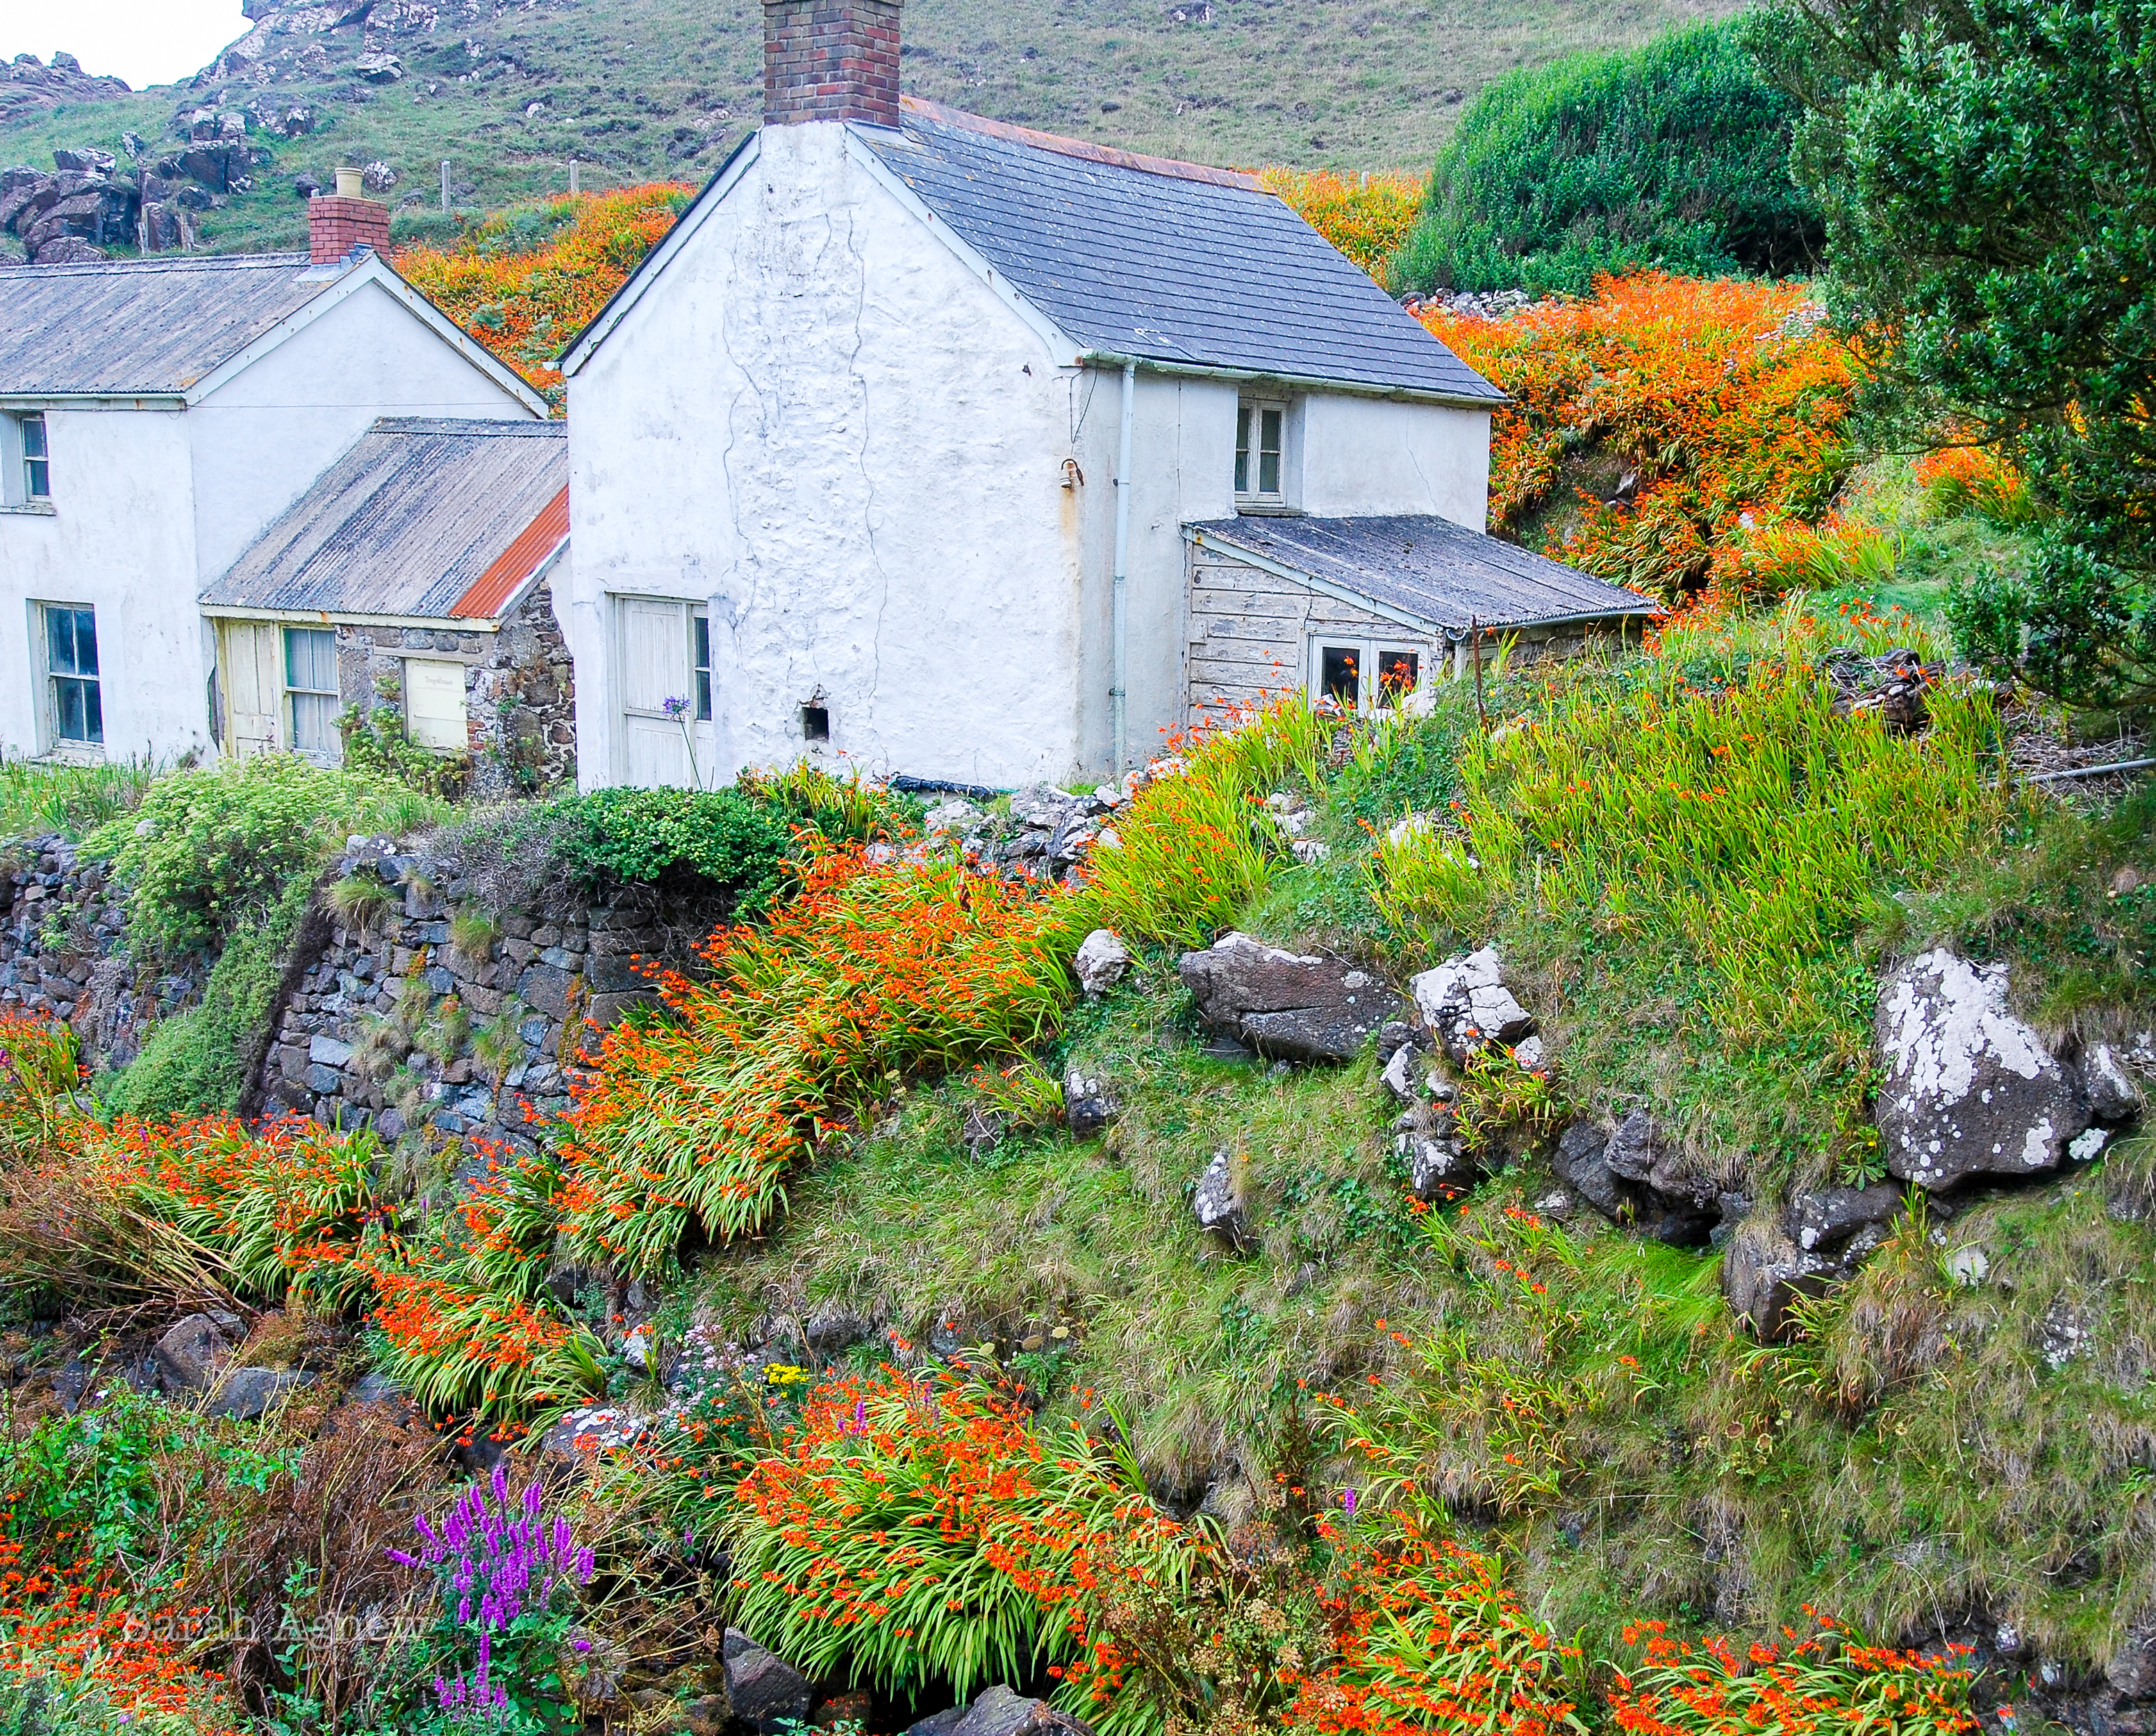 Lord Falmouth's cottages, Kynance Cove, Cornwall, Sarah Agnew Photos